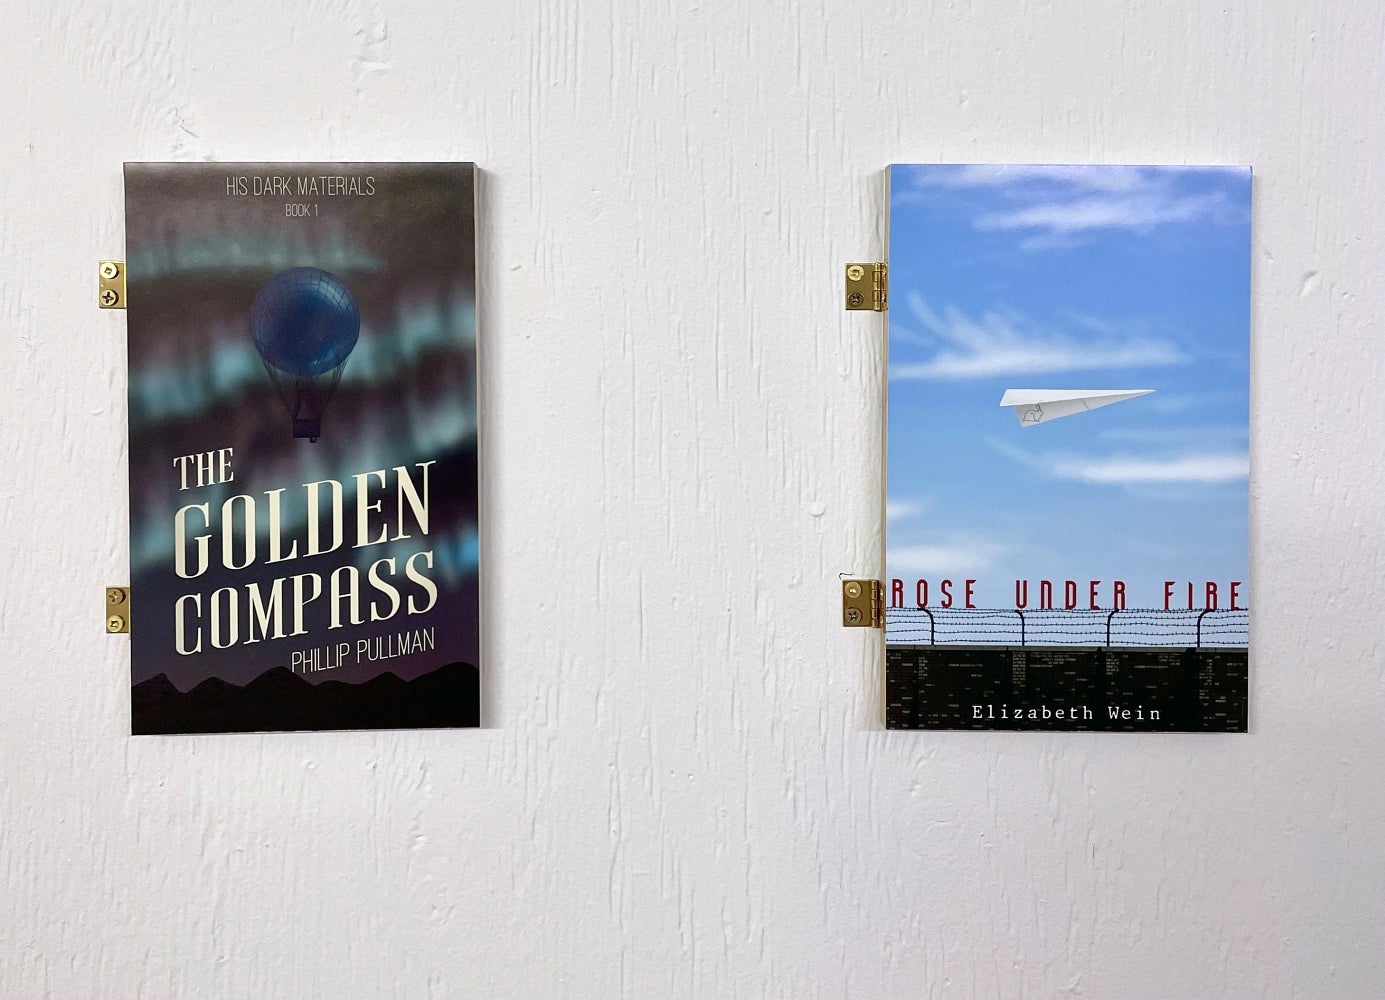 Art installation of 2 book covers attached to the wall with hinges titled "The golden compass" and "Rose under fire"